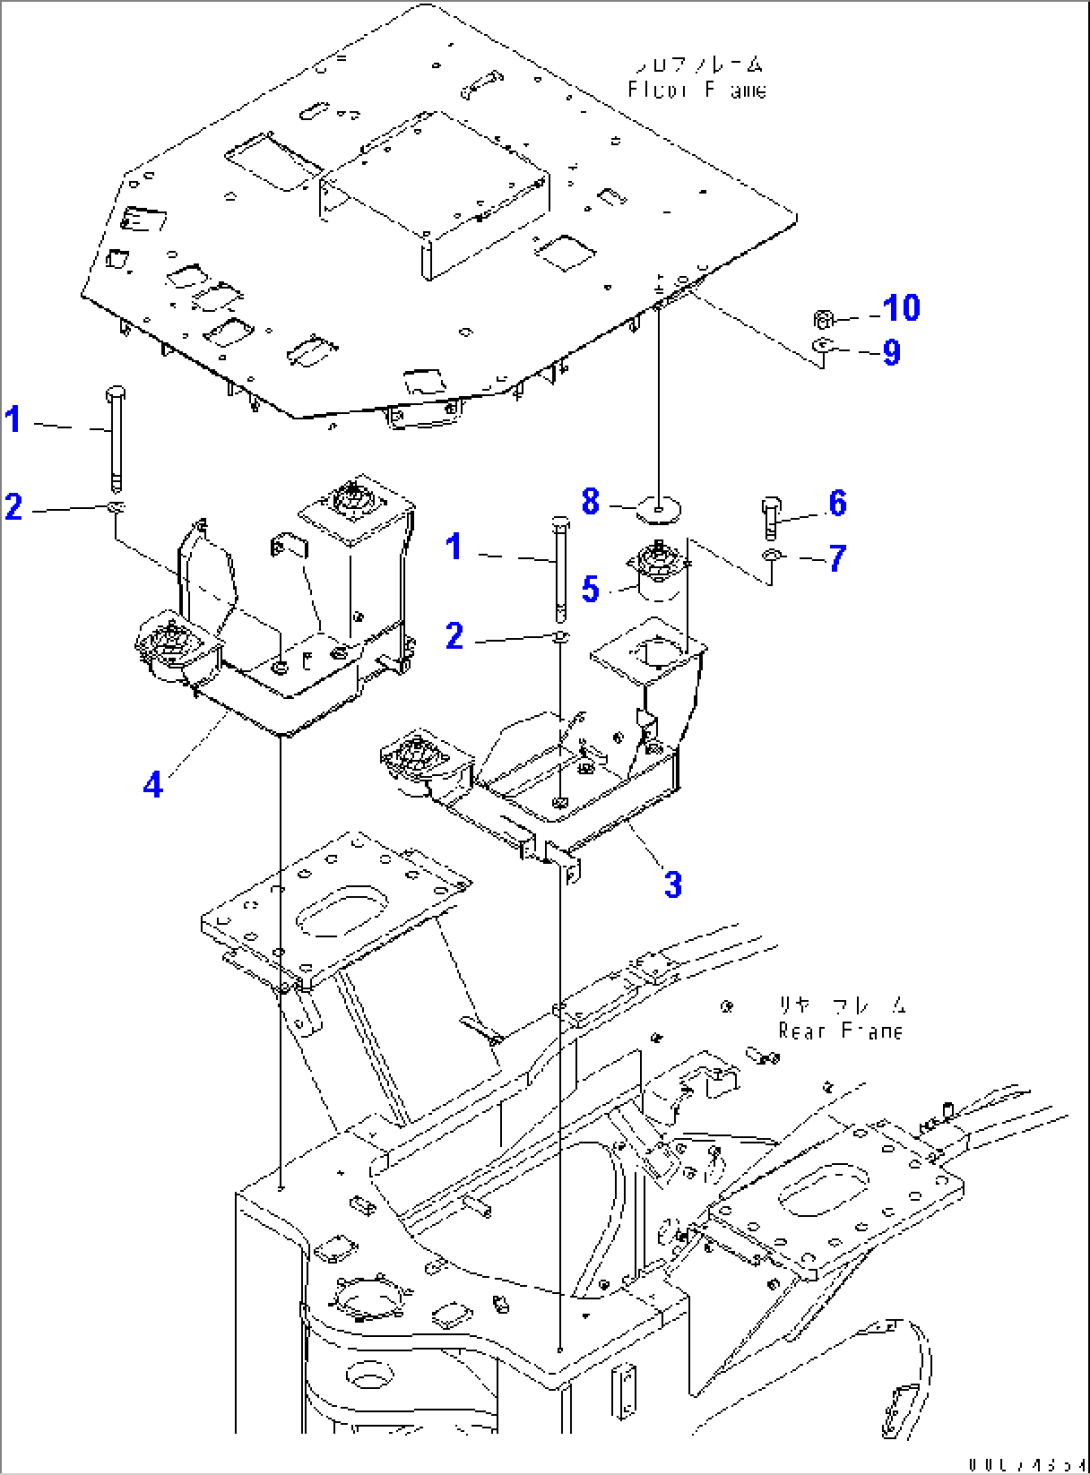 SUPPORT (WITH ADVANCED JOY STICK STEERING)(#51075-)